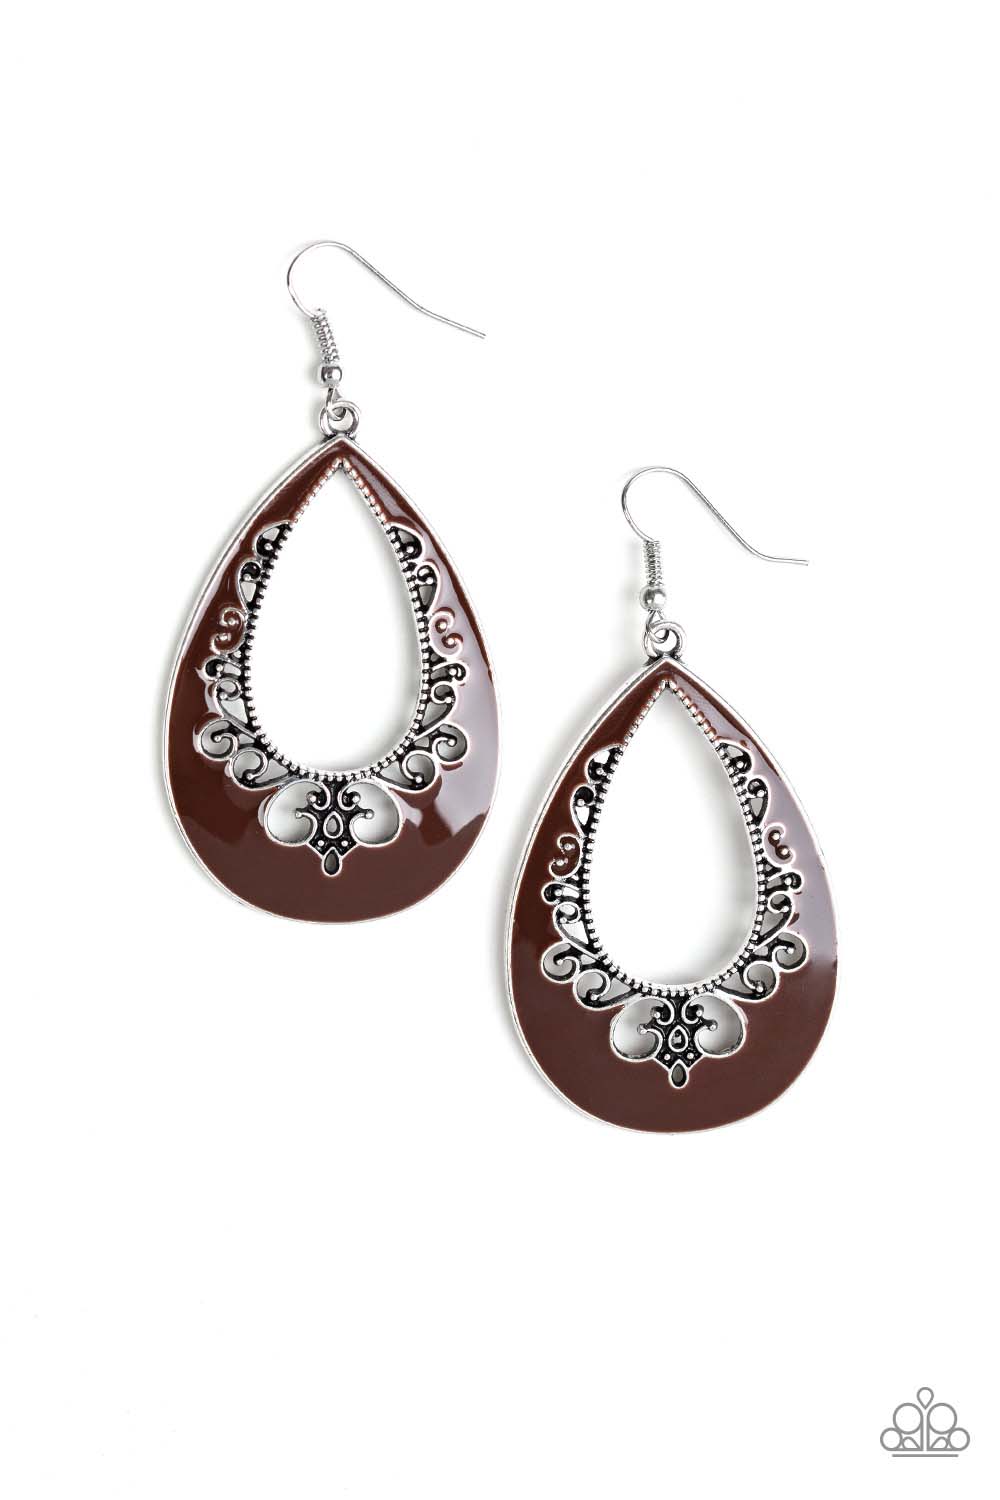 Compliments To The CHIC Brown Earrings - Paparazzi Accessories - lightbox -CarasShop.com - $5 Jewelry by Cara Jewels